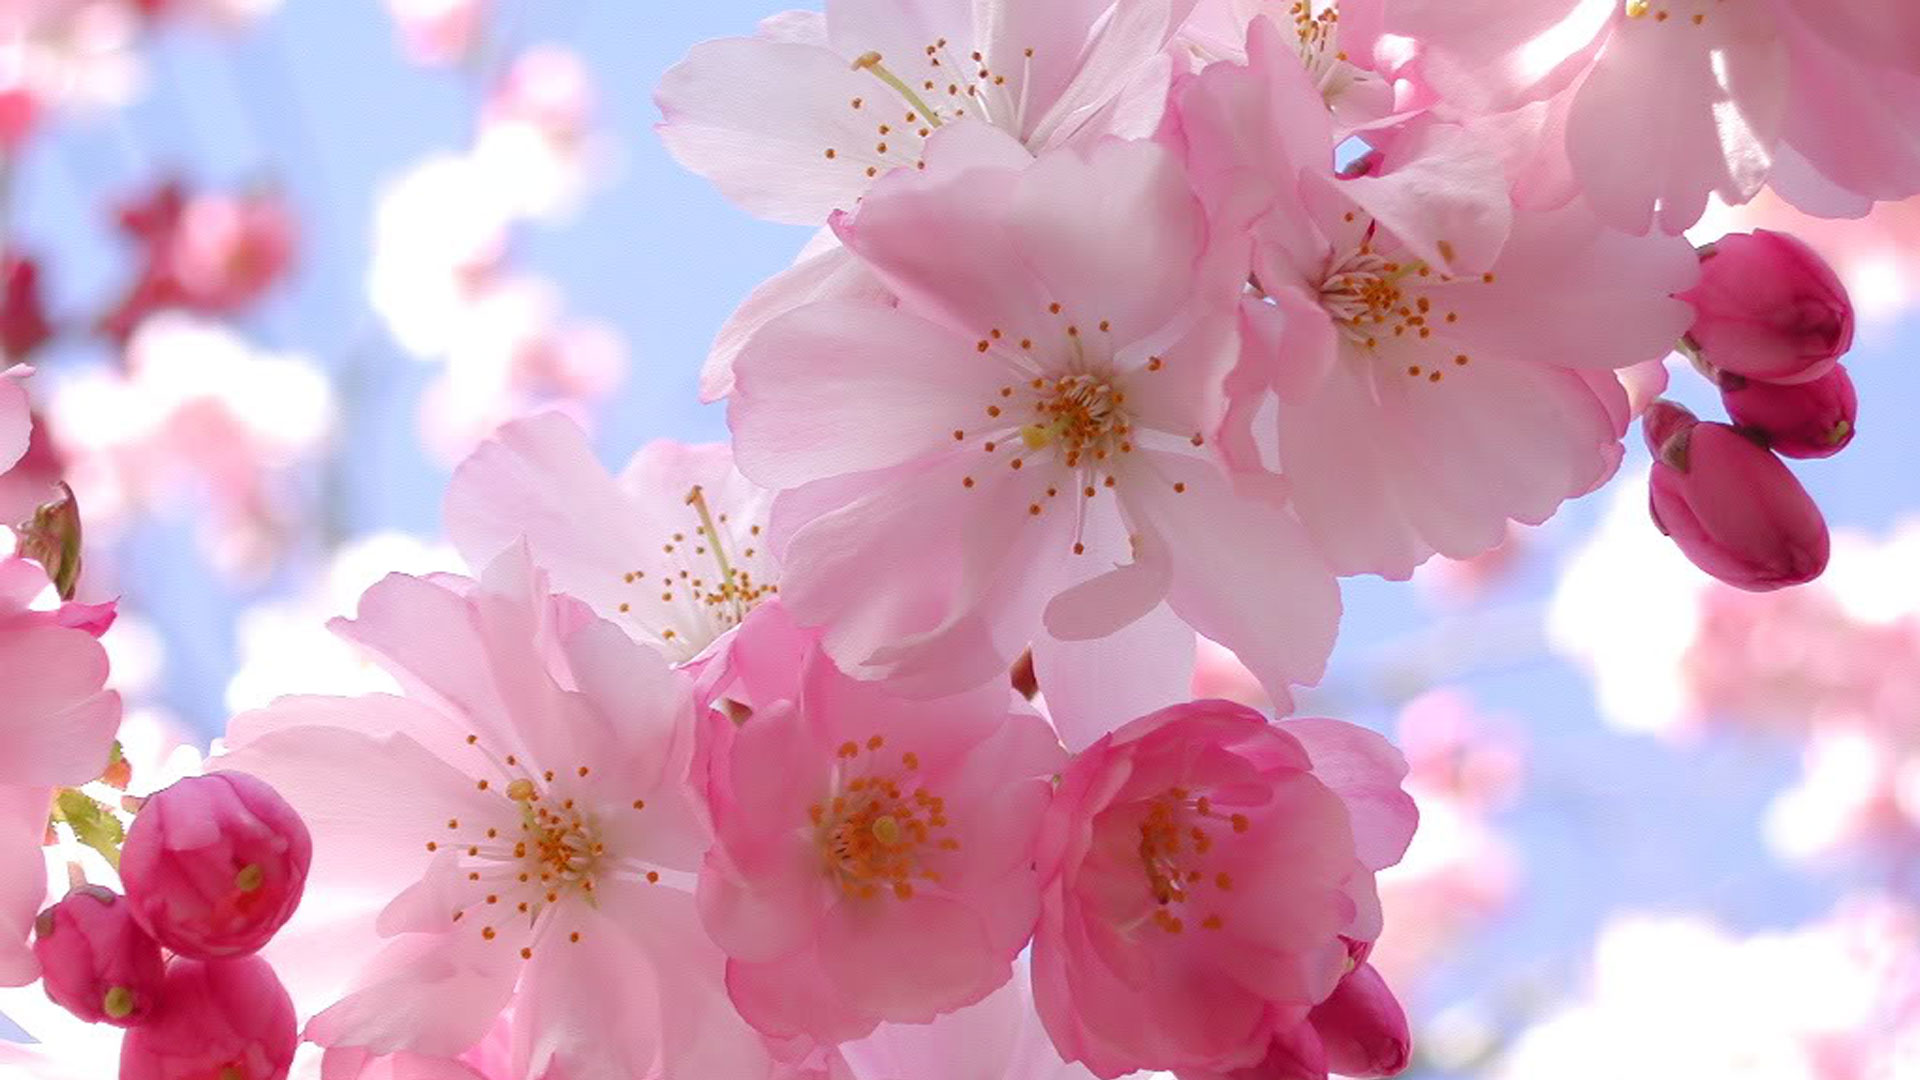 Blooming Pink Cherry Blossom - Cherry Blossom Backgrounds , HD Wallpaper & Backgrounds